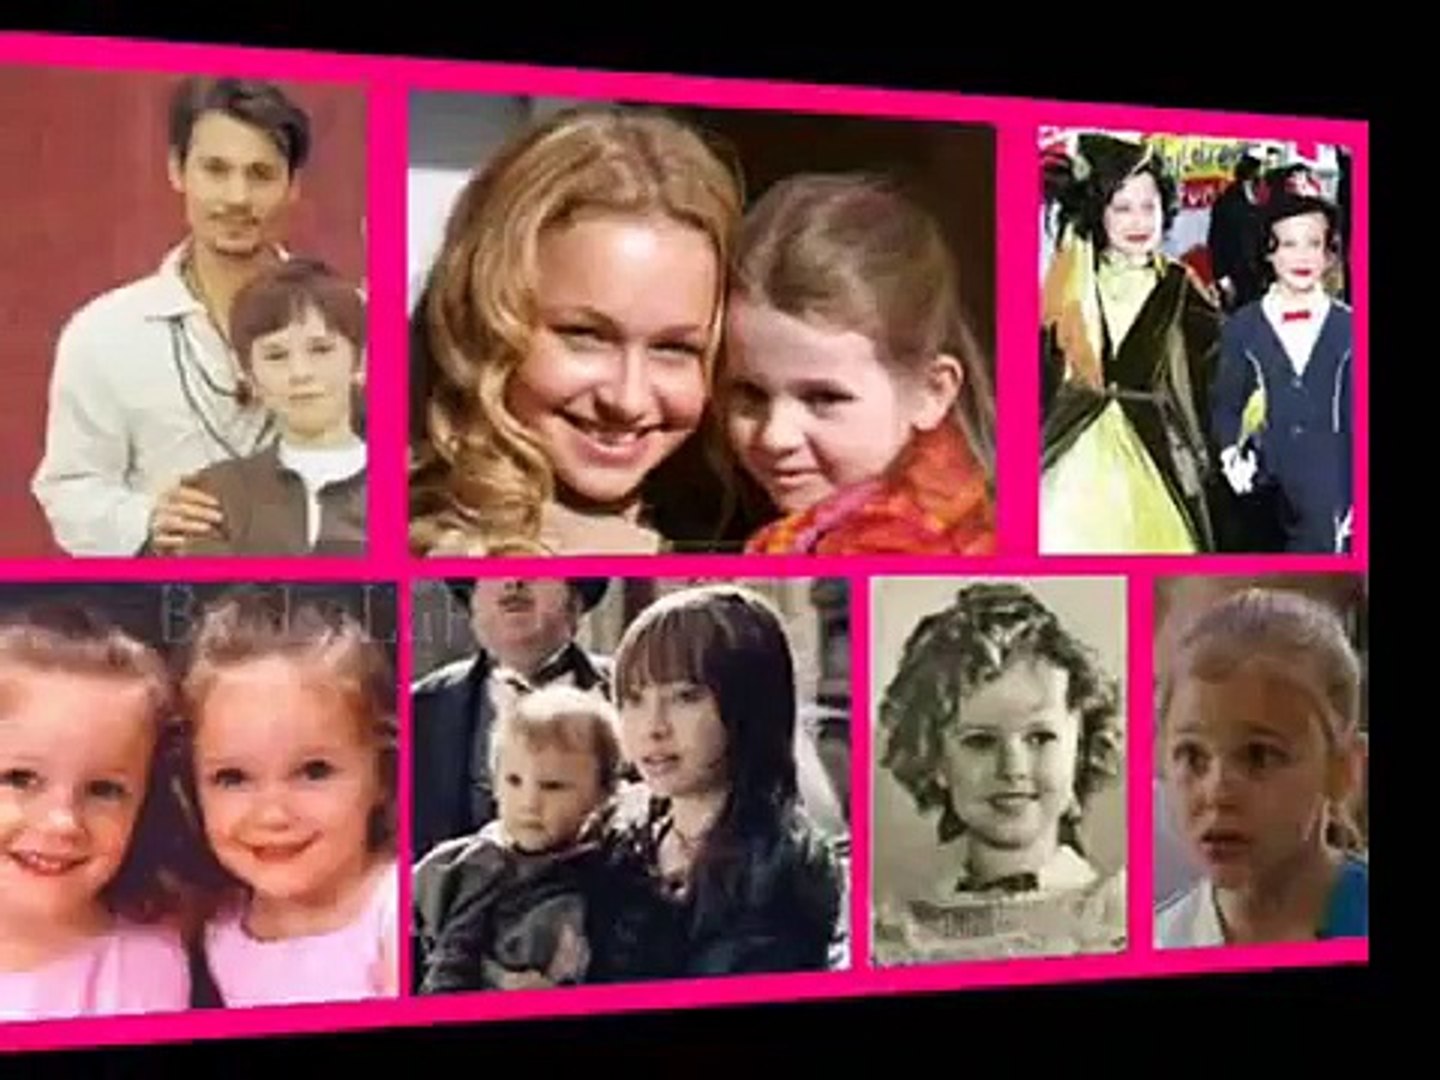 My favorite actors and actresses (Dakota and Elle Fanning..)